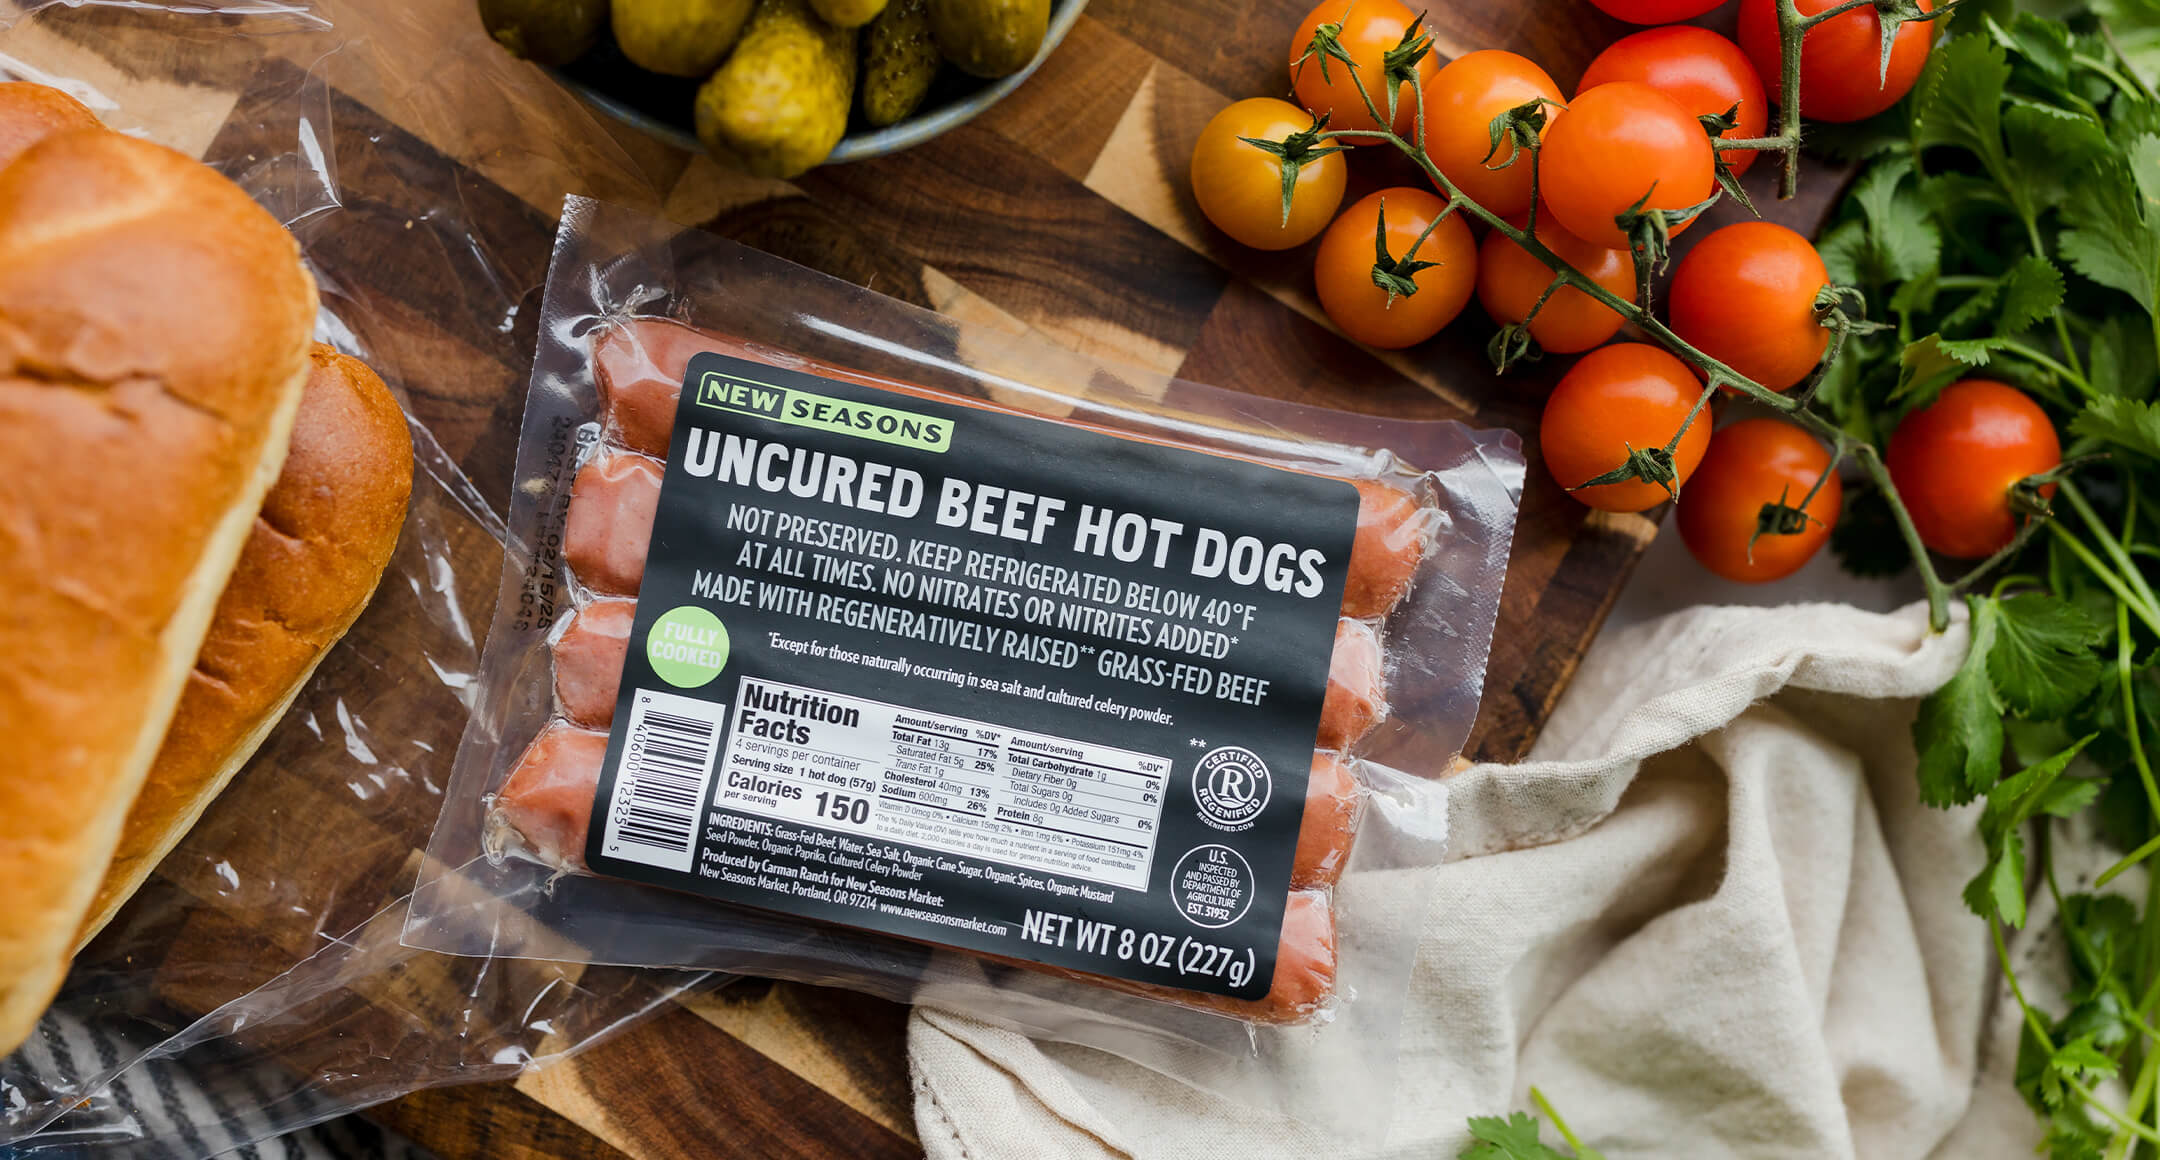 A package of New Seasons Uncured Beef Hot Dogs on a countertop.